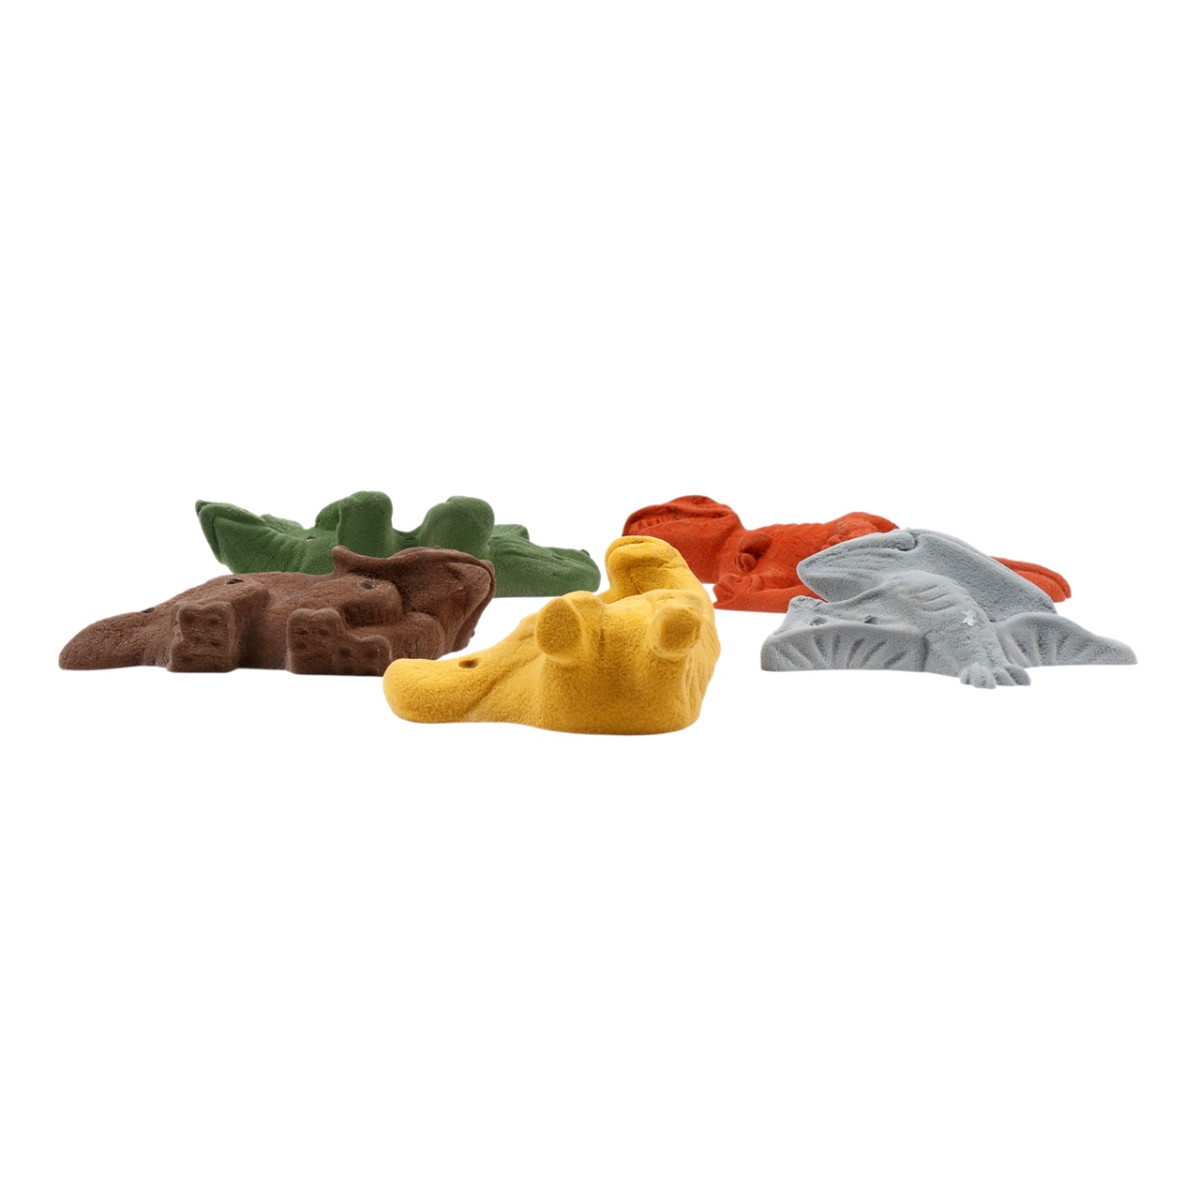 XL Dinosaur Climbing Holds - Screw-Ons - Mixed Earth Tones